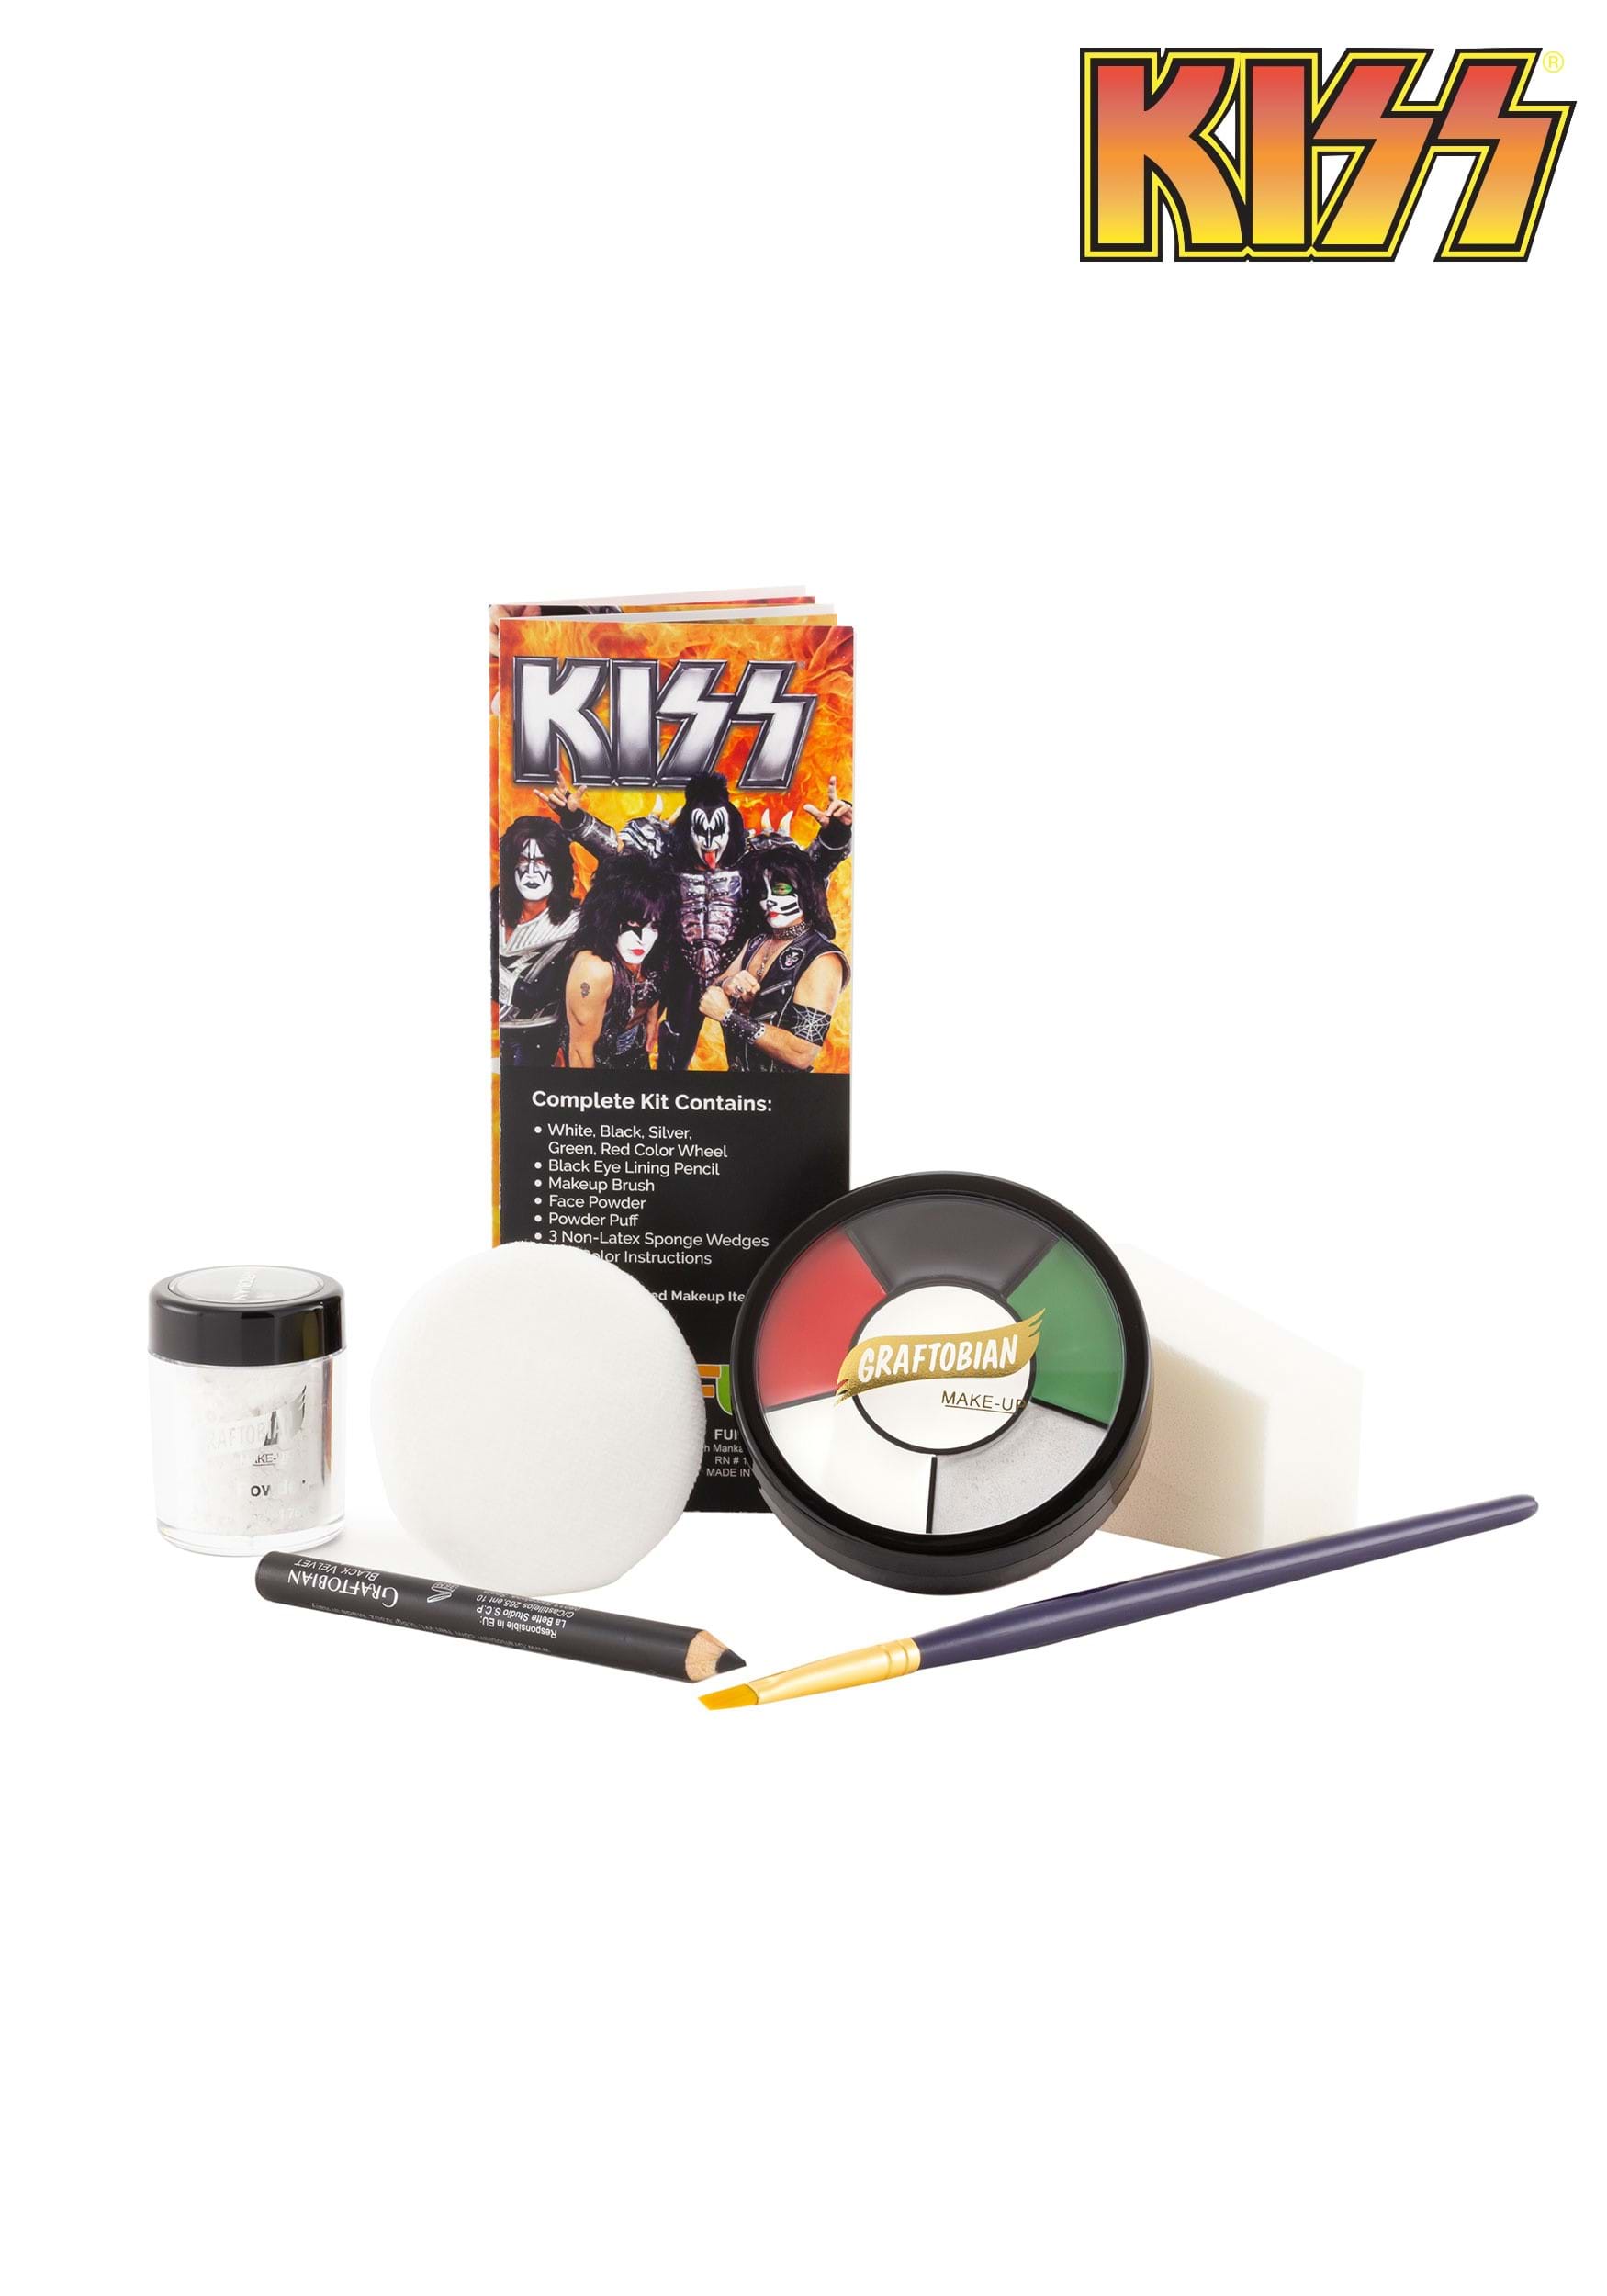 kiss band face paint